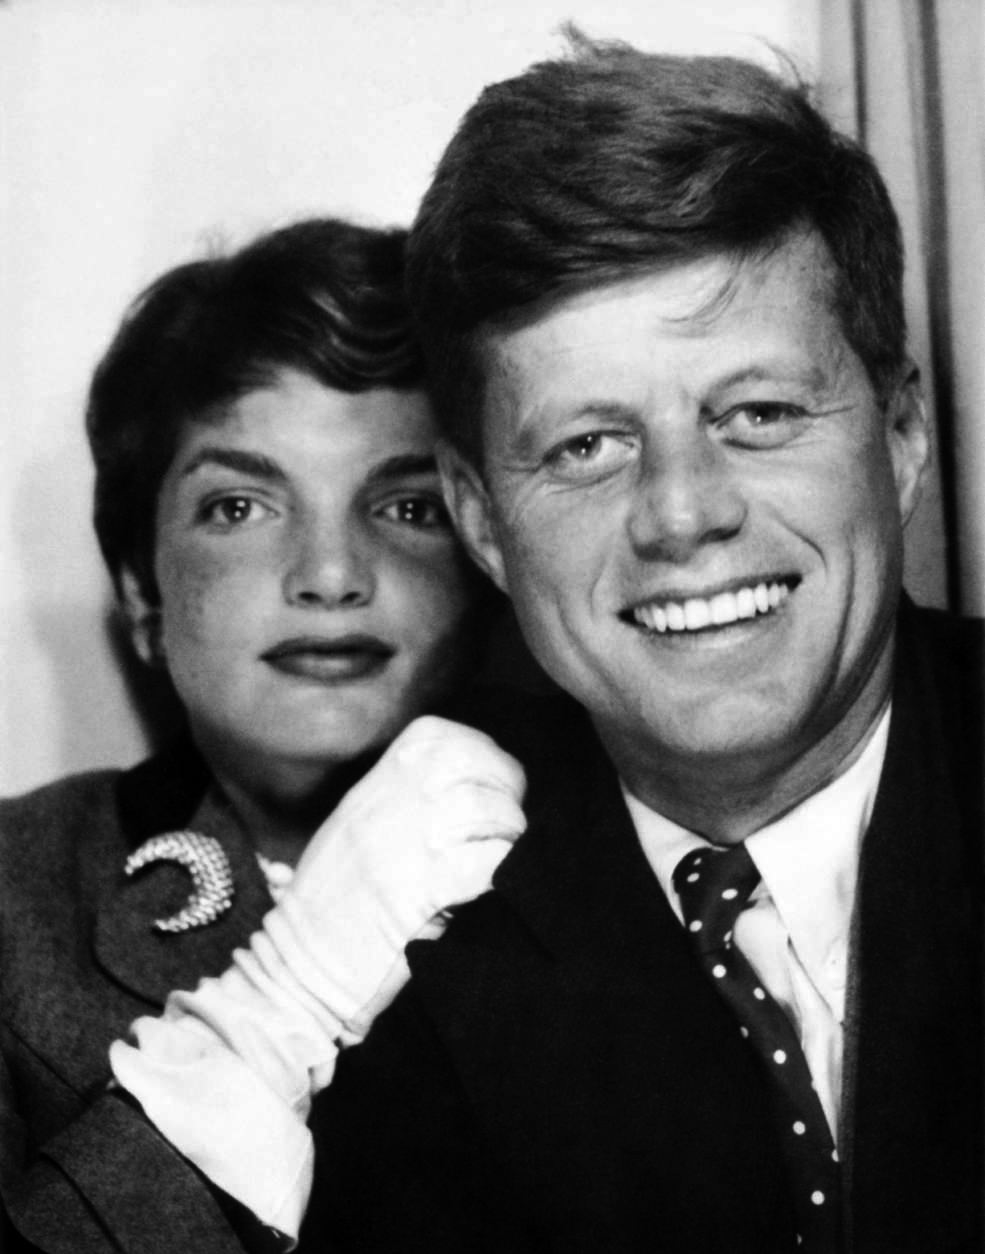 A photo-booth picture of John F. Kennedy and Jacqueline Bouvier, circa 1953.